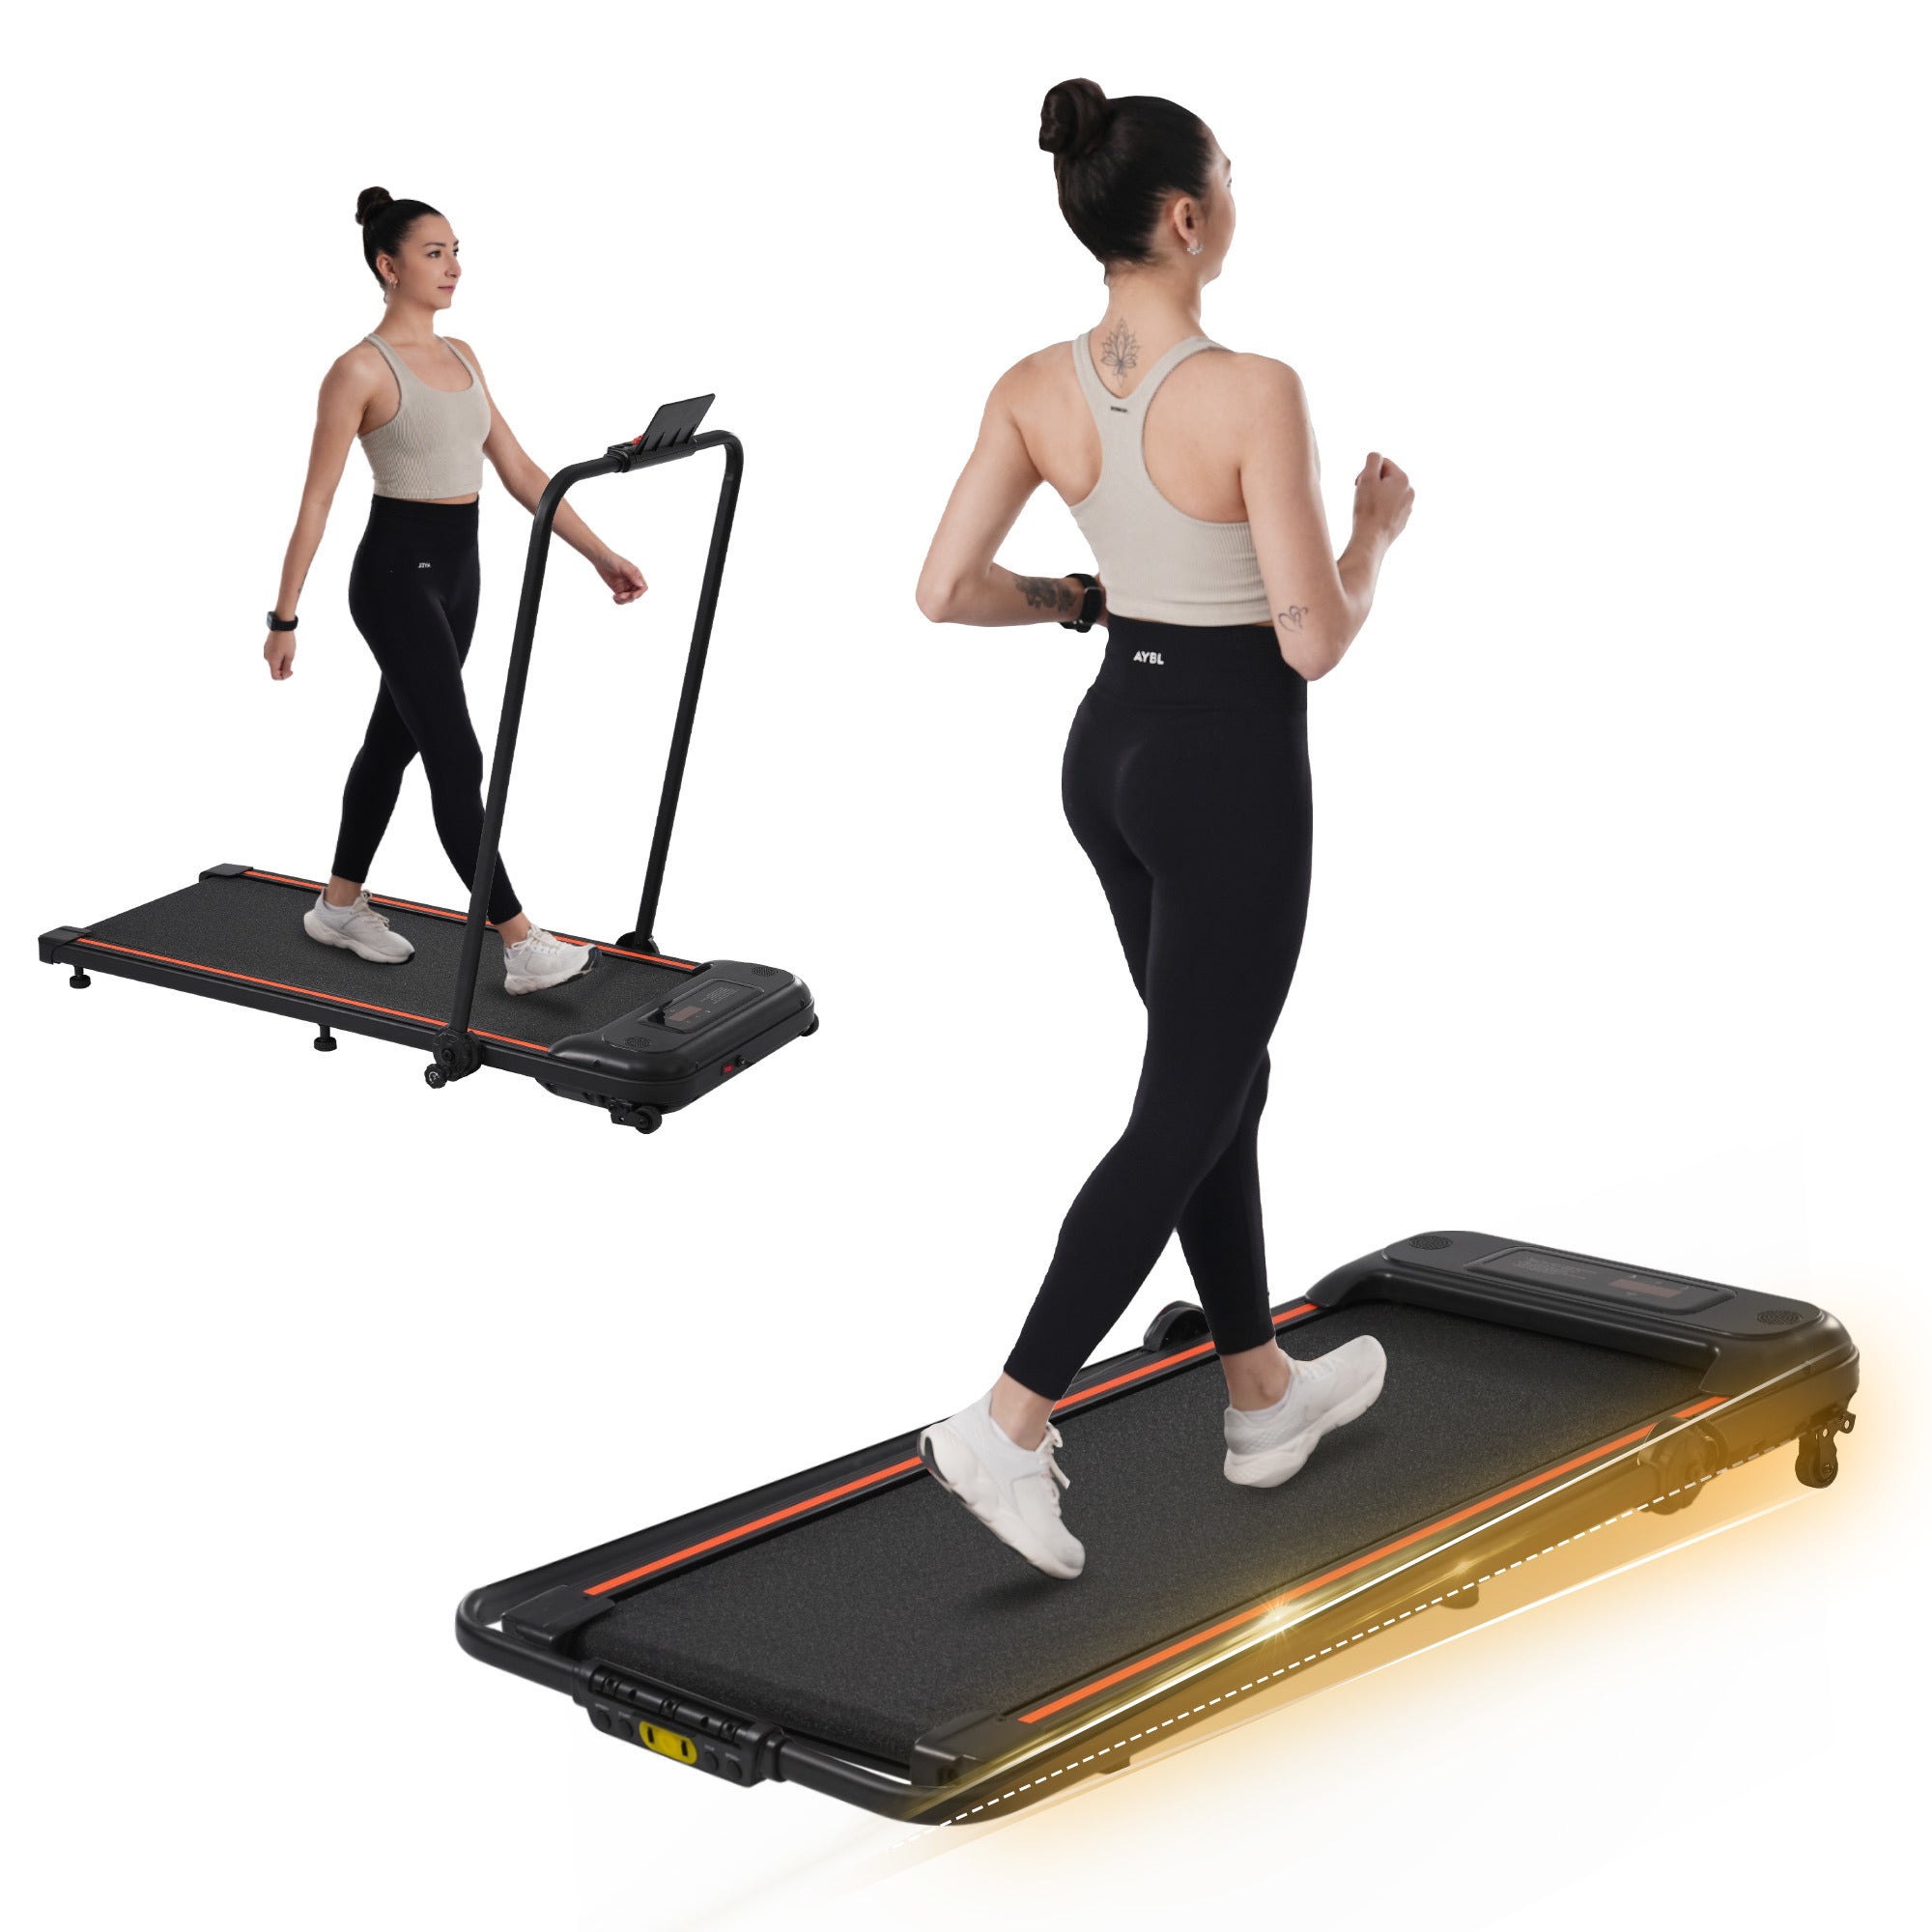 NEW Folding Walking Pad Under Desk Treadmill for Home Office -2.5HP Walking Treadmill With Incline Bluetooth Speaker 0.5-7.5MPH 265LBS Capacity Treadmill for Walking Running - Two Ways to Adjust Speed